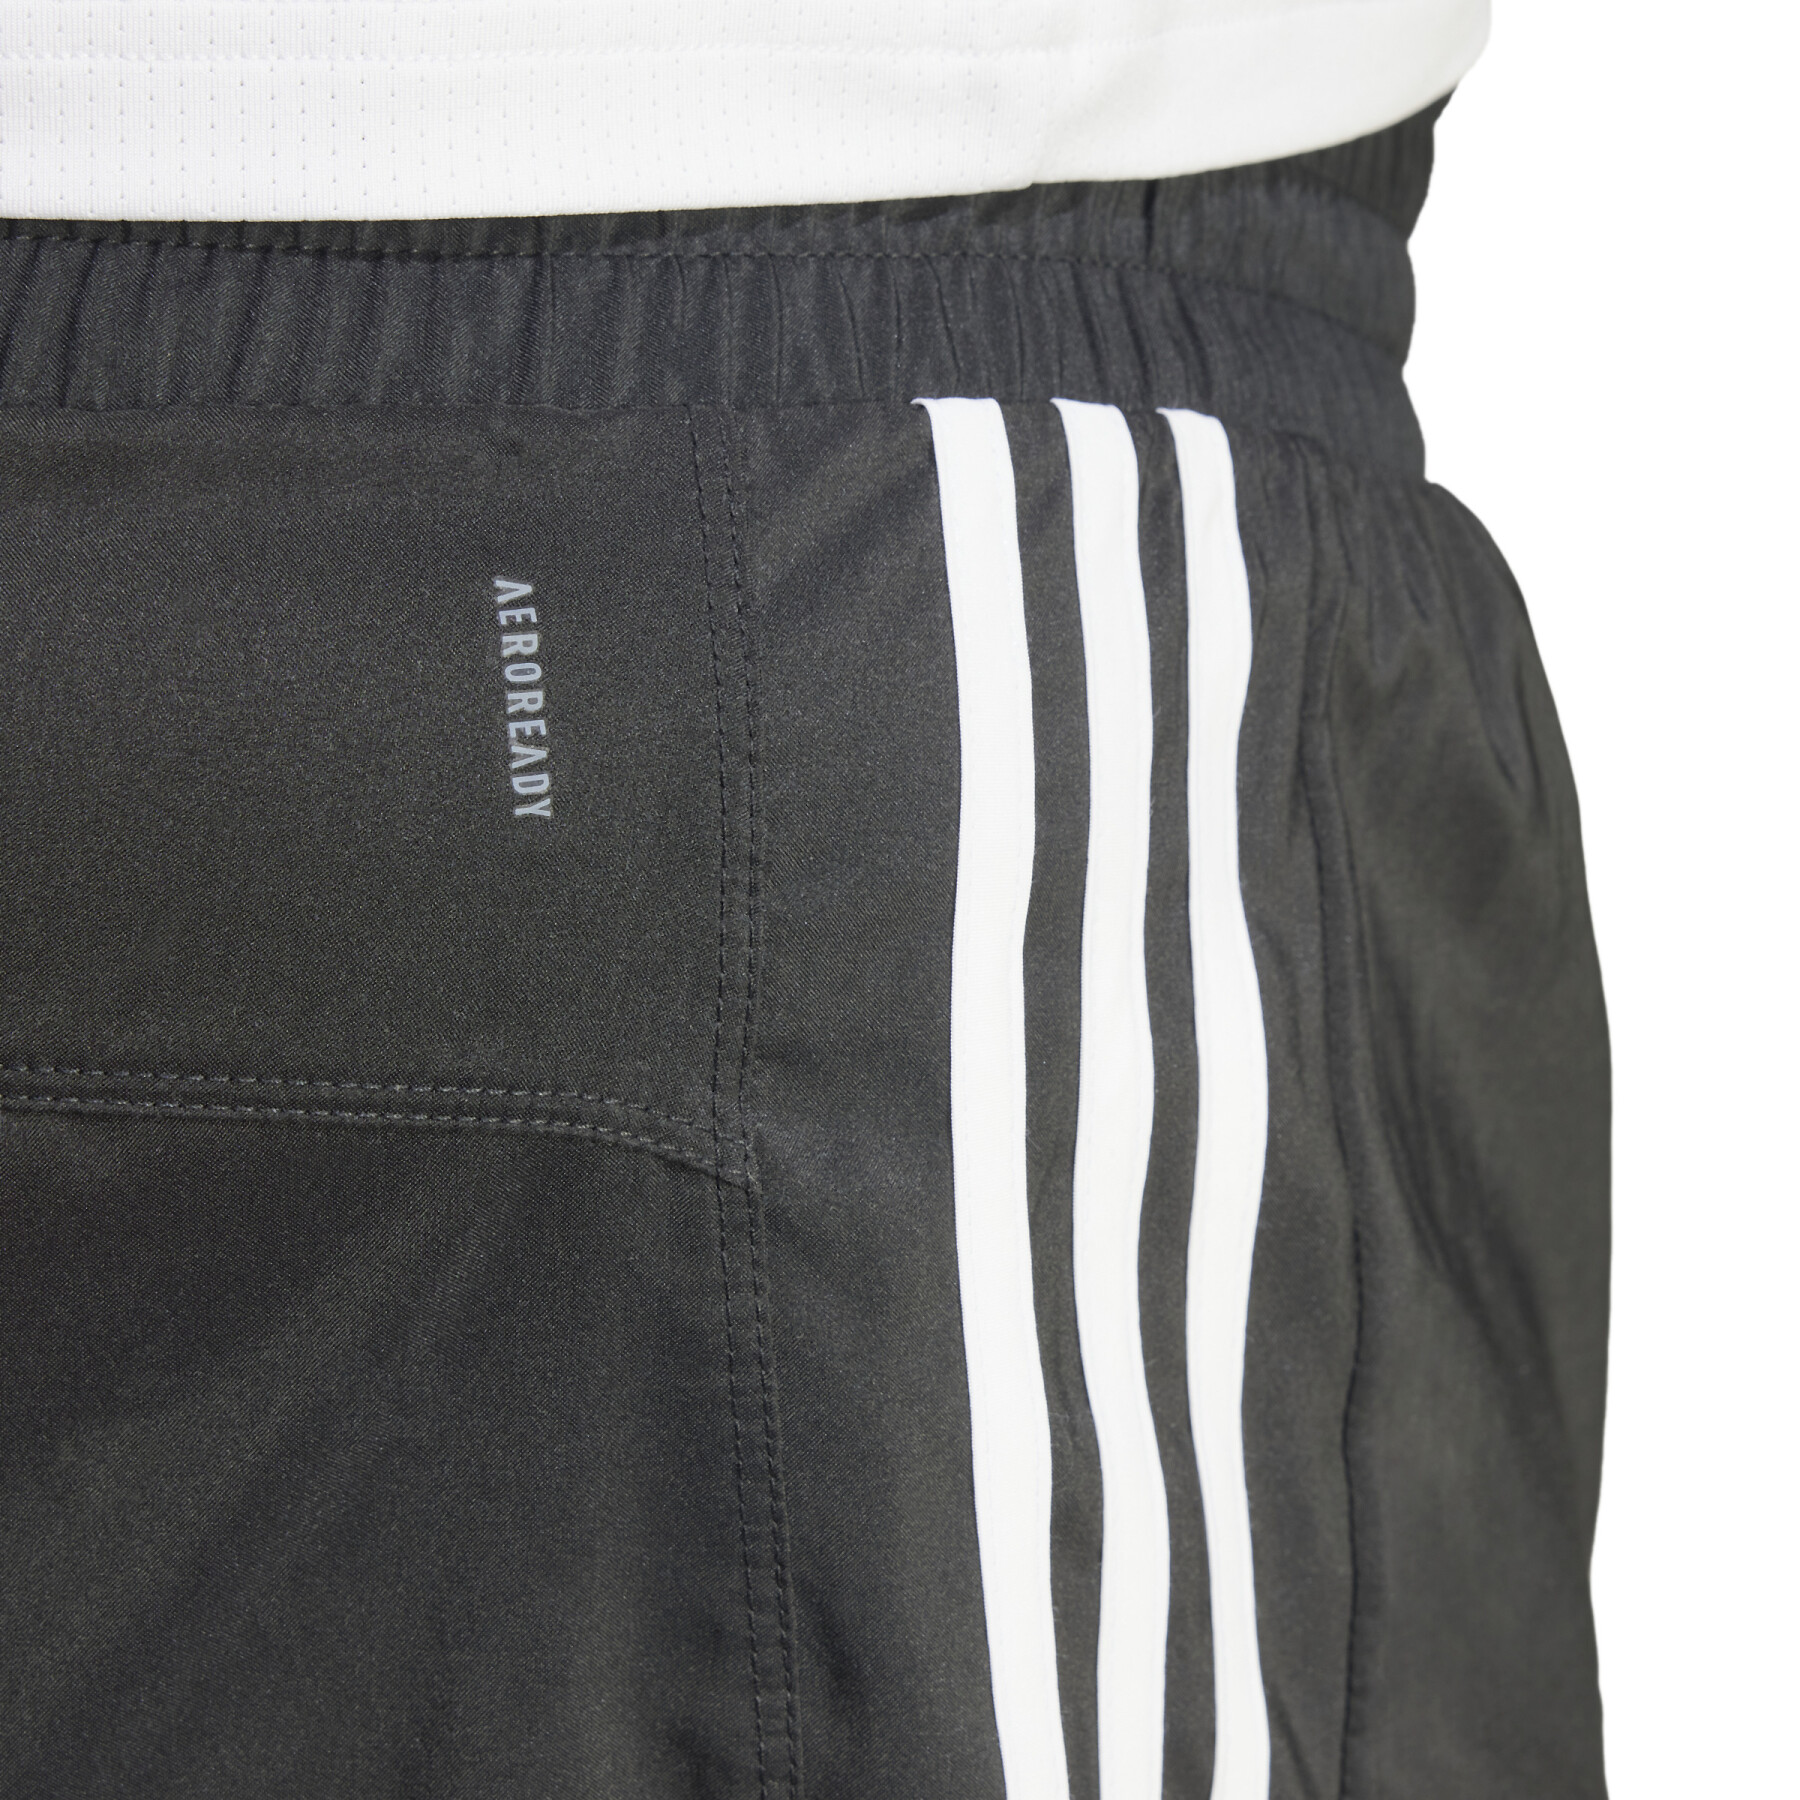 Women's high-waisted training shorts adidas Pacer Pacer 3 Stripes Woven (GT)